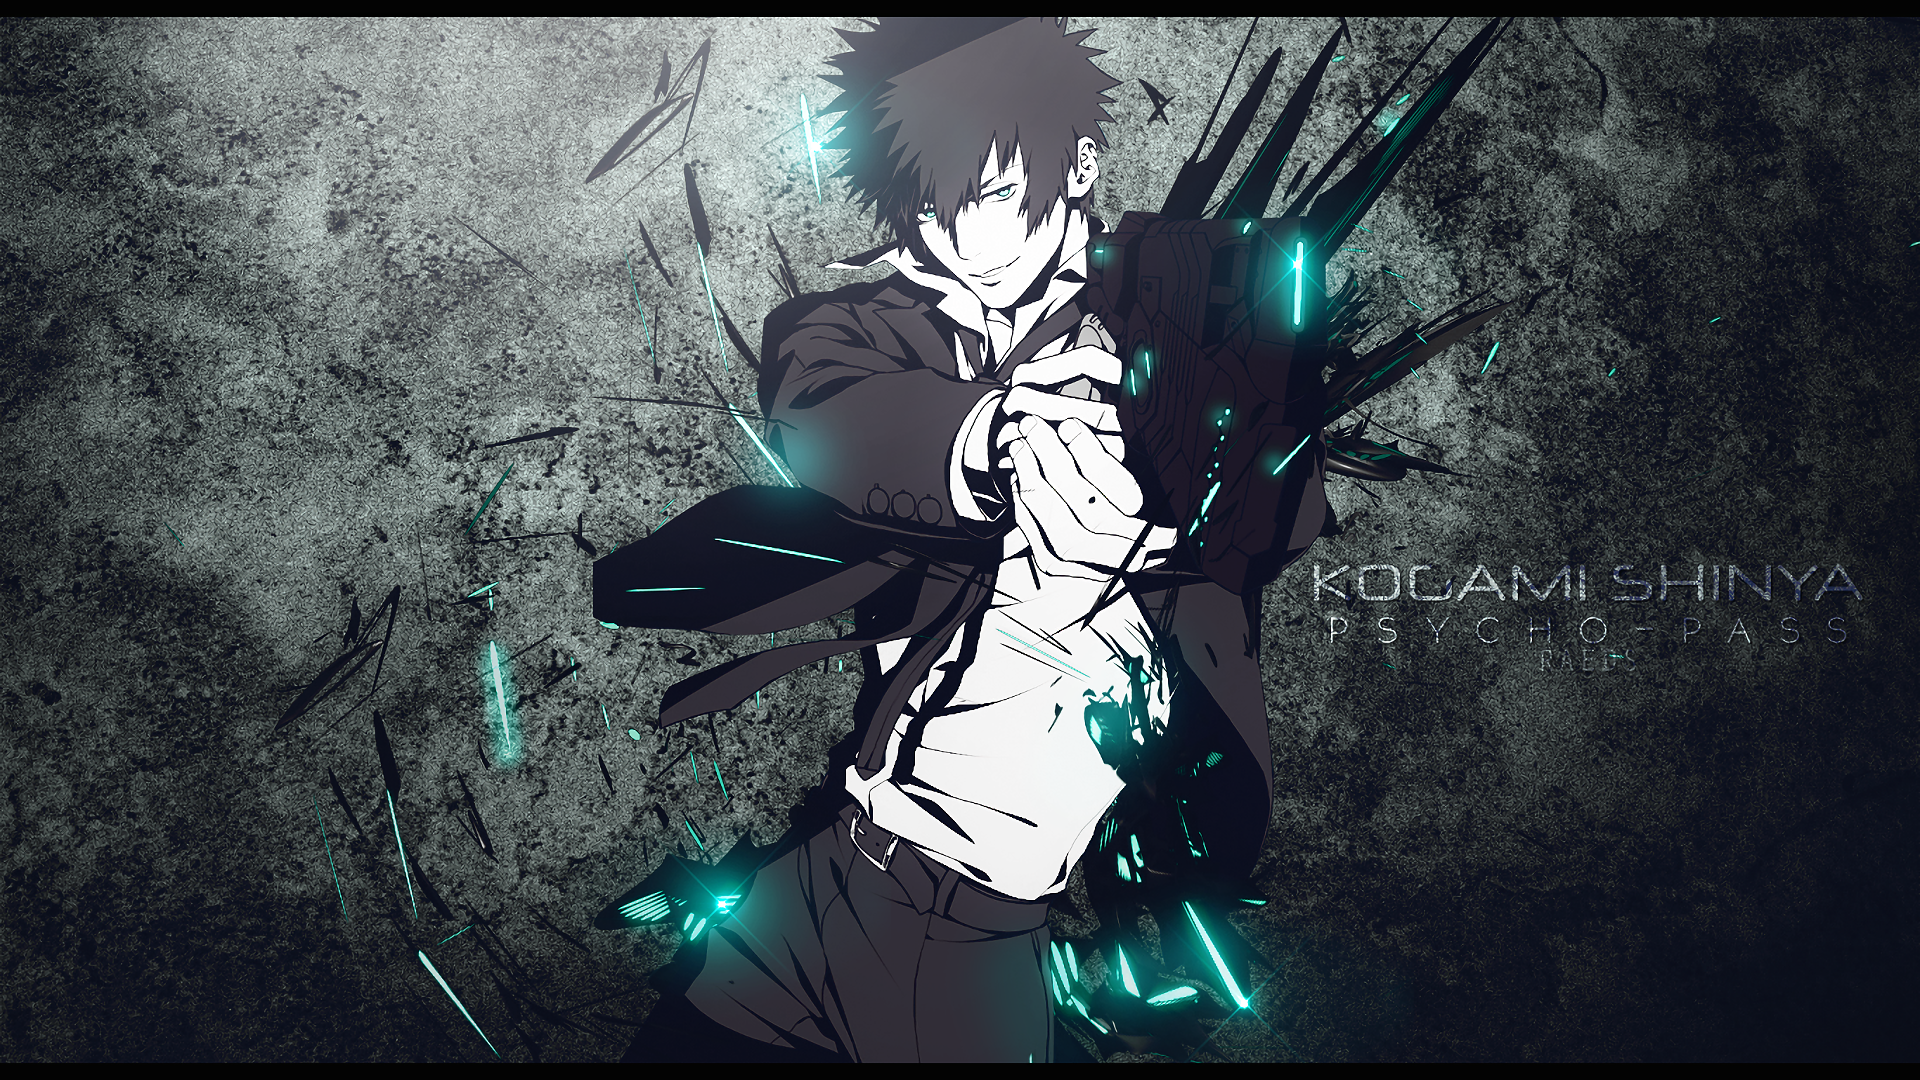 Psycho Pass Wallpapers Pictures Images HD Wallpapers Download Free Map Images Wallpaper [wallpaper376.blogspot.com]